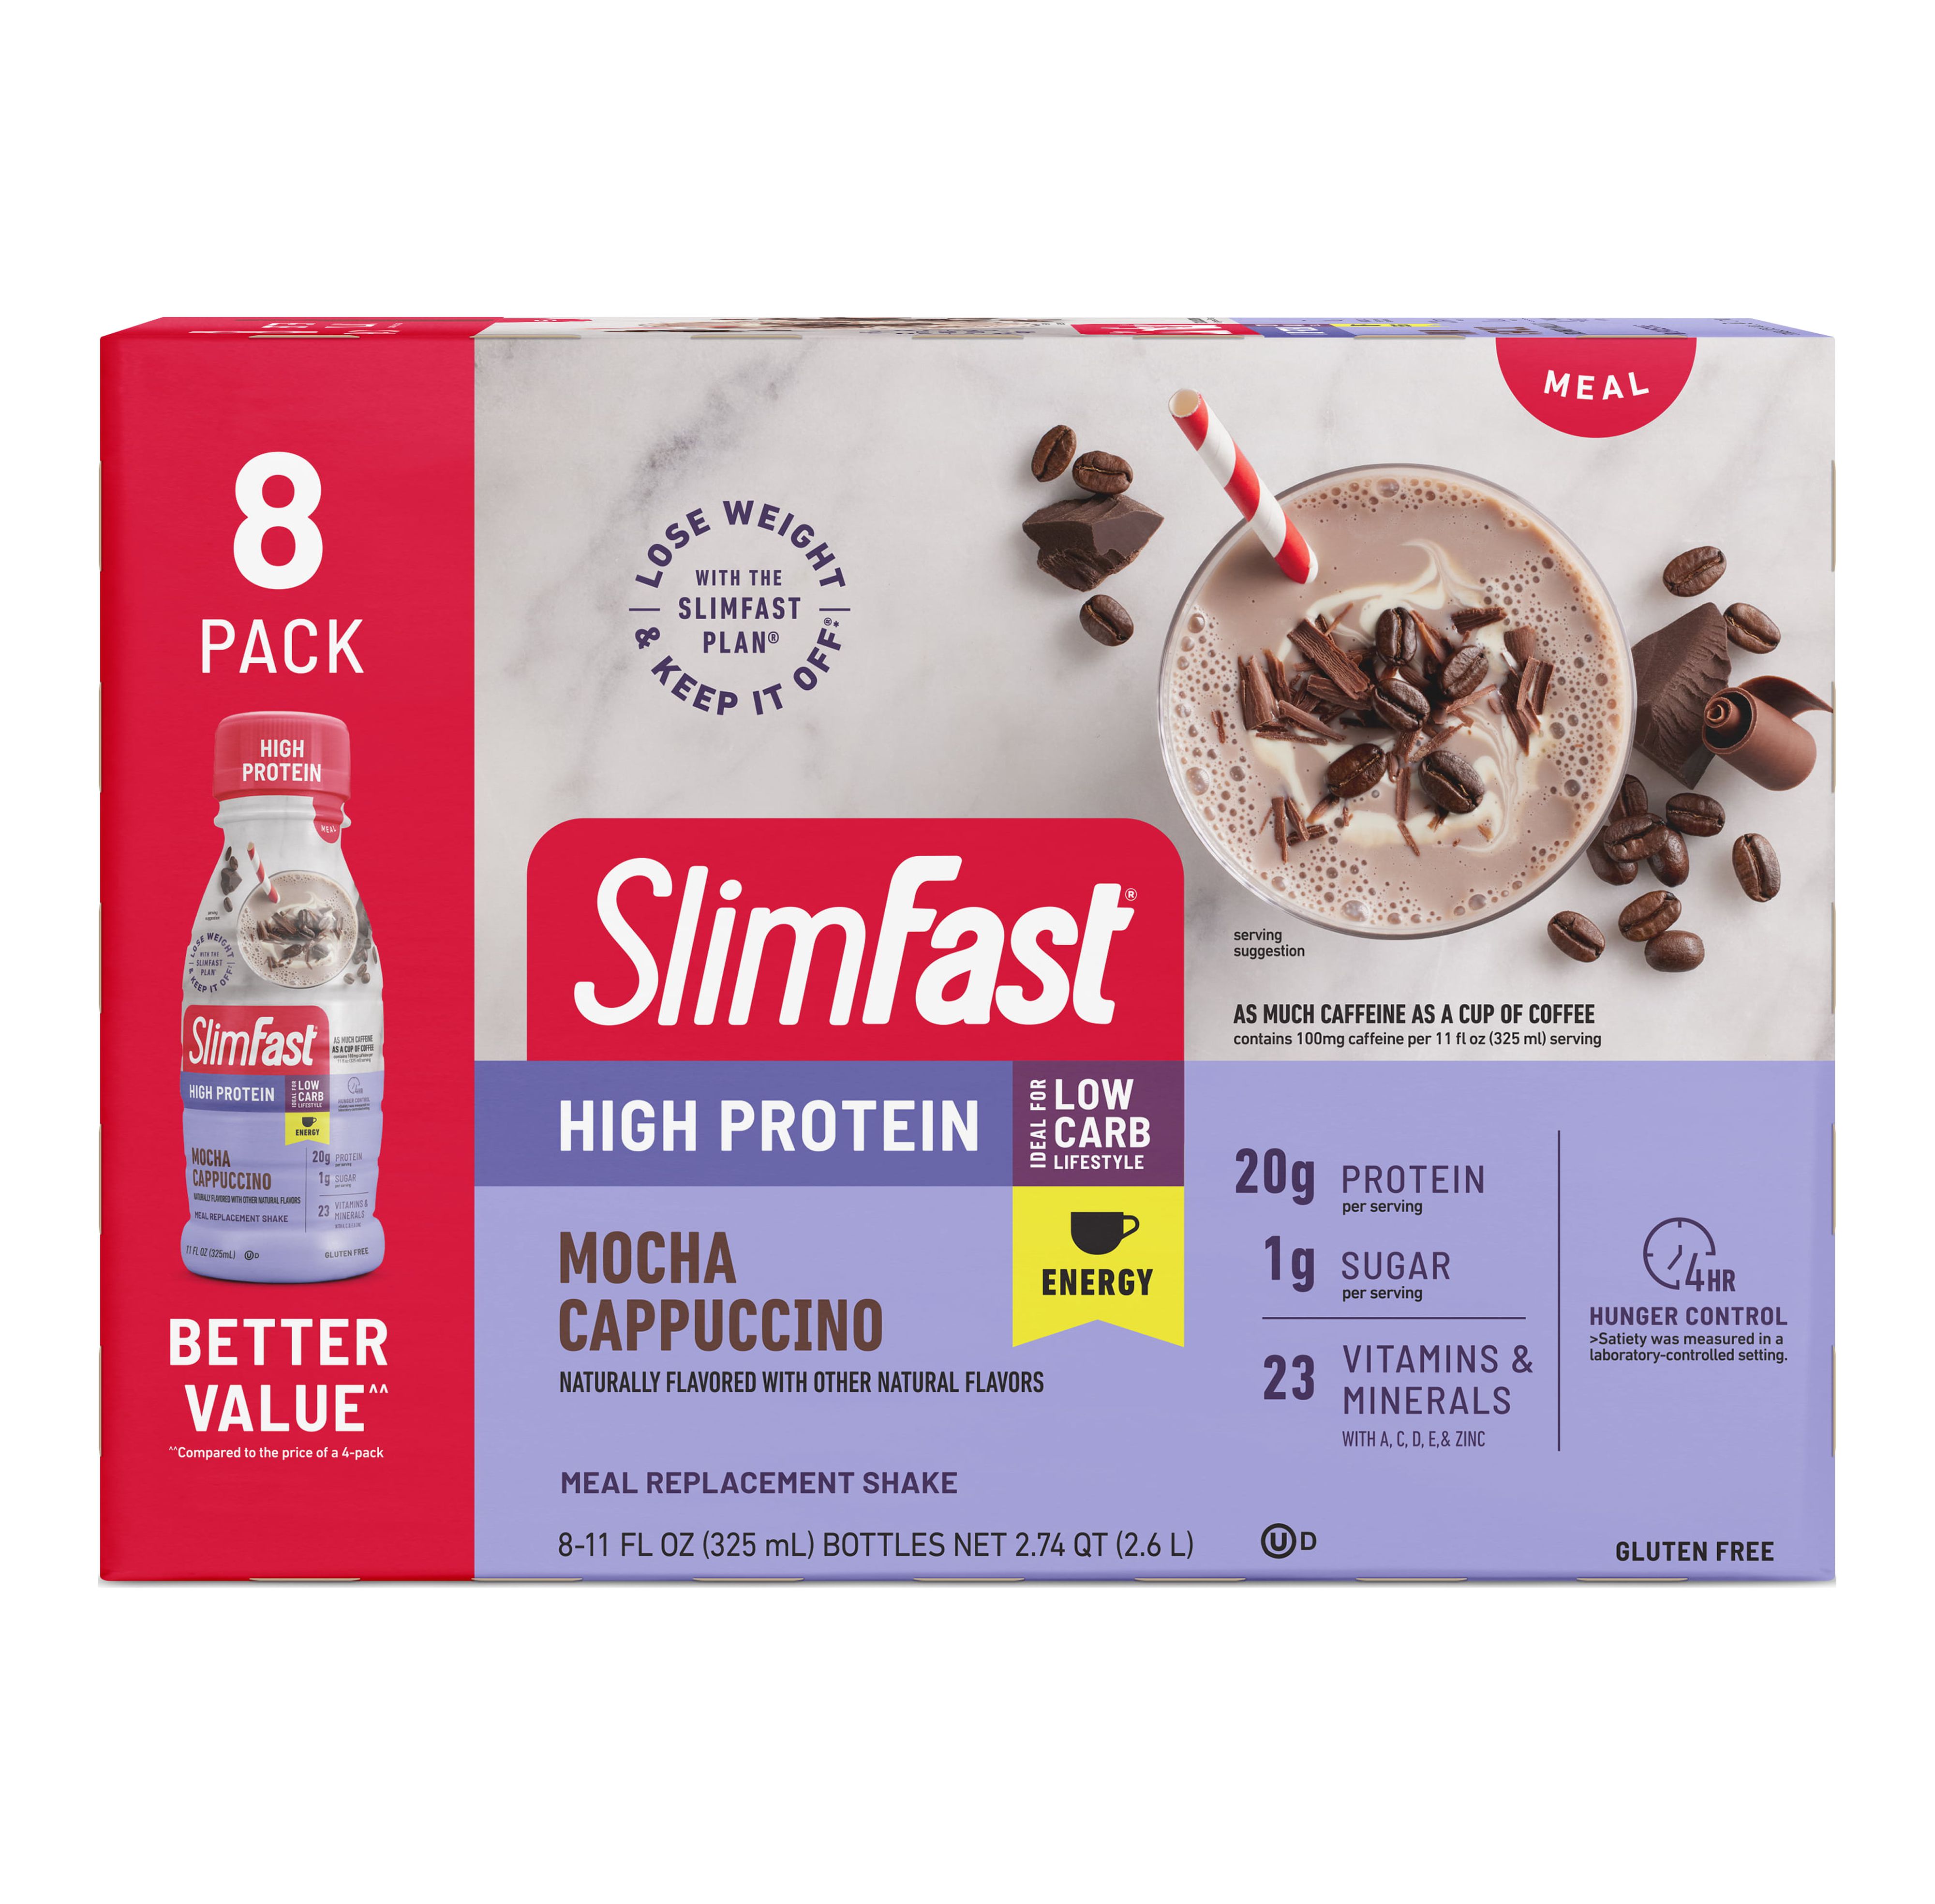 SlimFast Meal Replacement Energy High Protein Shake, Mocha Cappuccino, 11 Fl Oz Bottle, 8 Pack - image 1 of 6